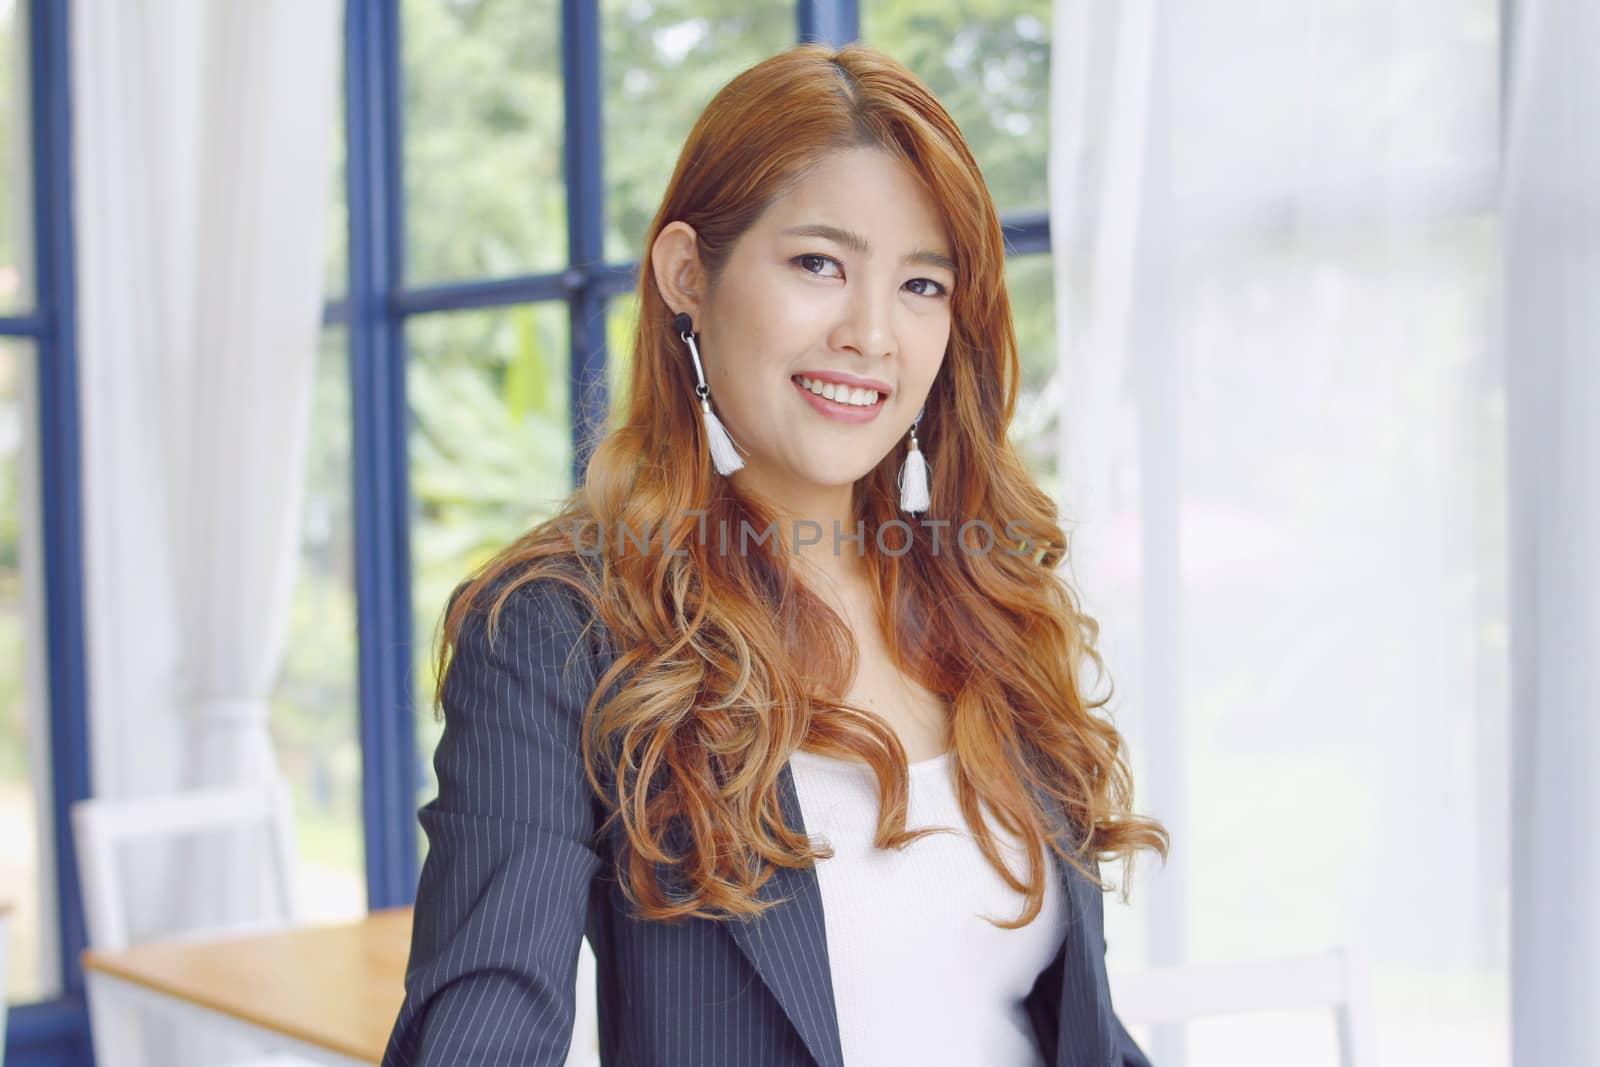 portrait of a business woman smiling and beautiful